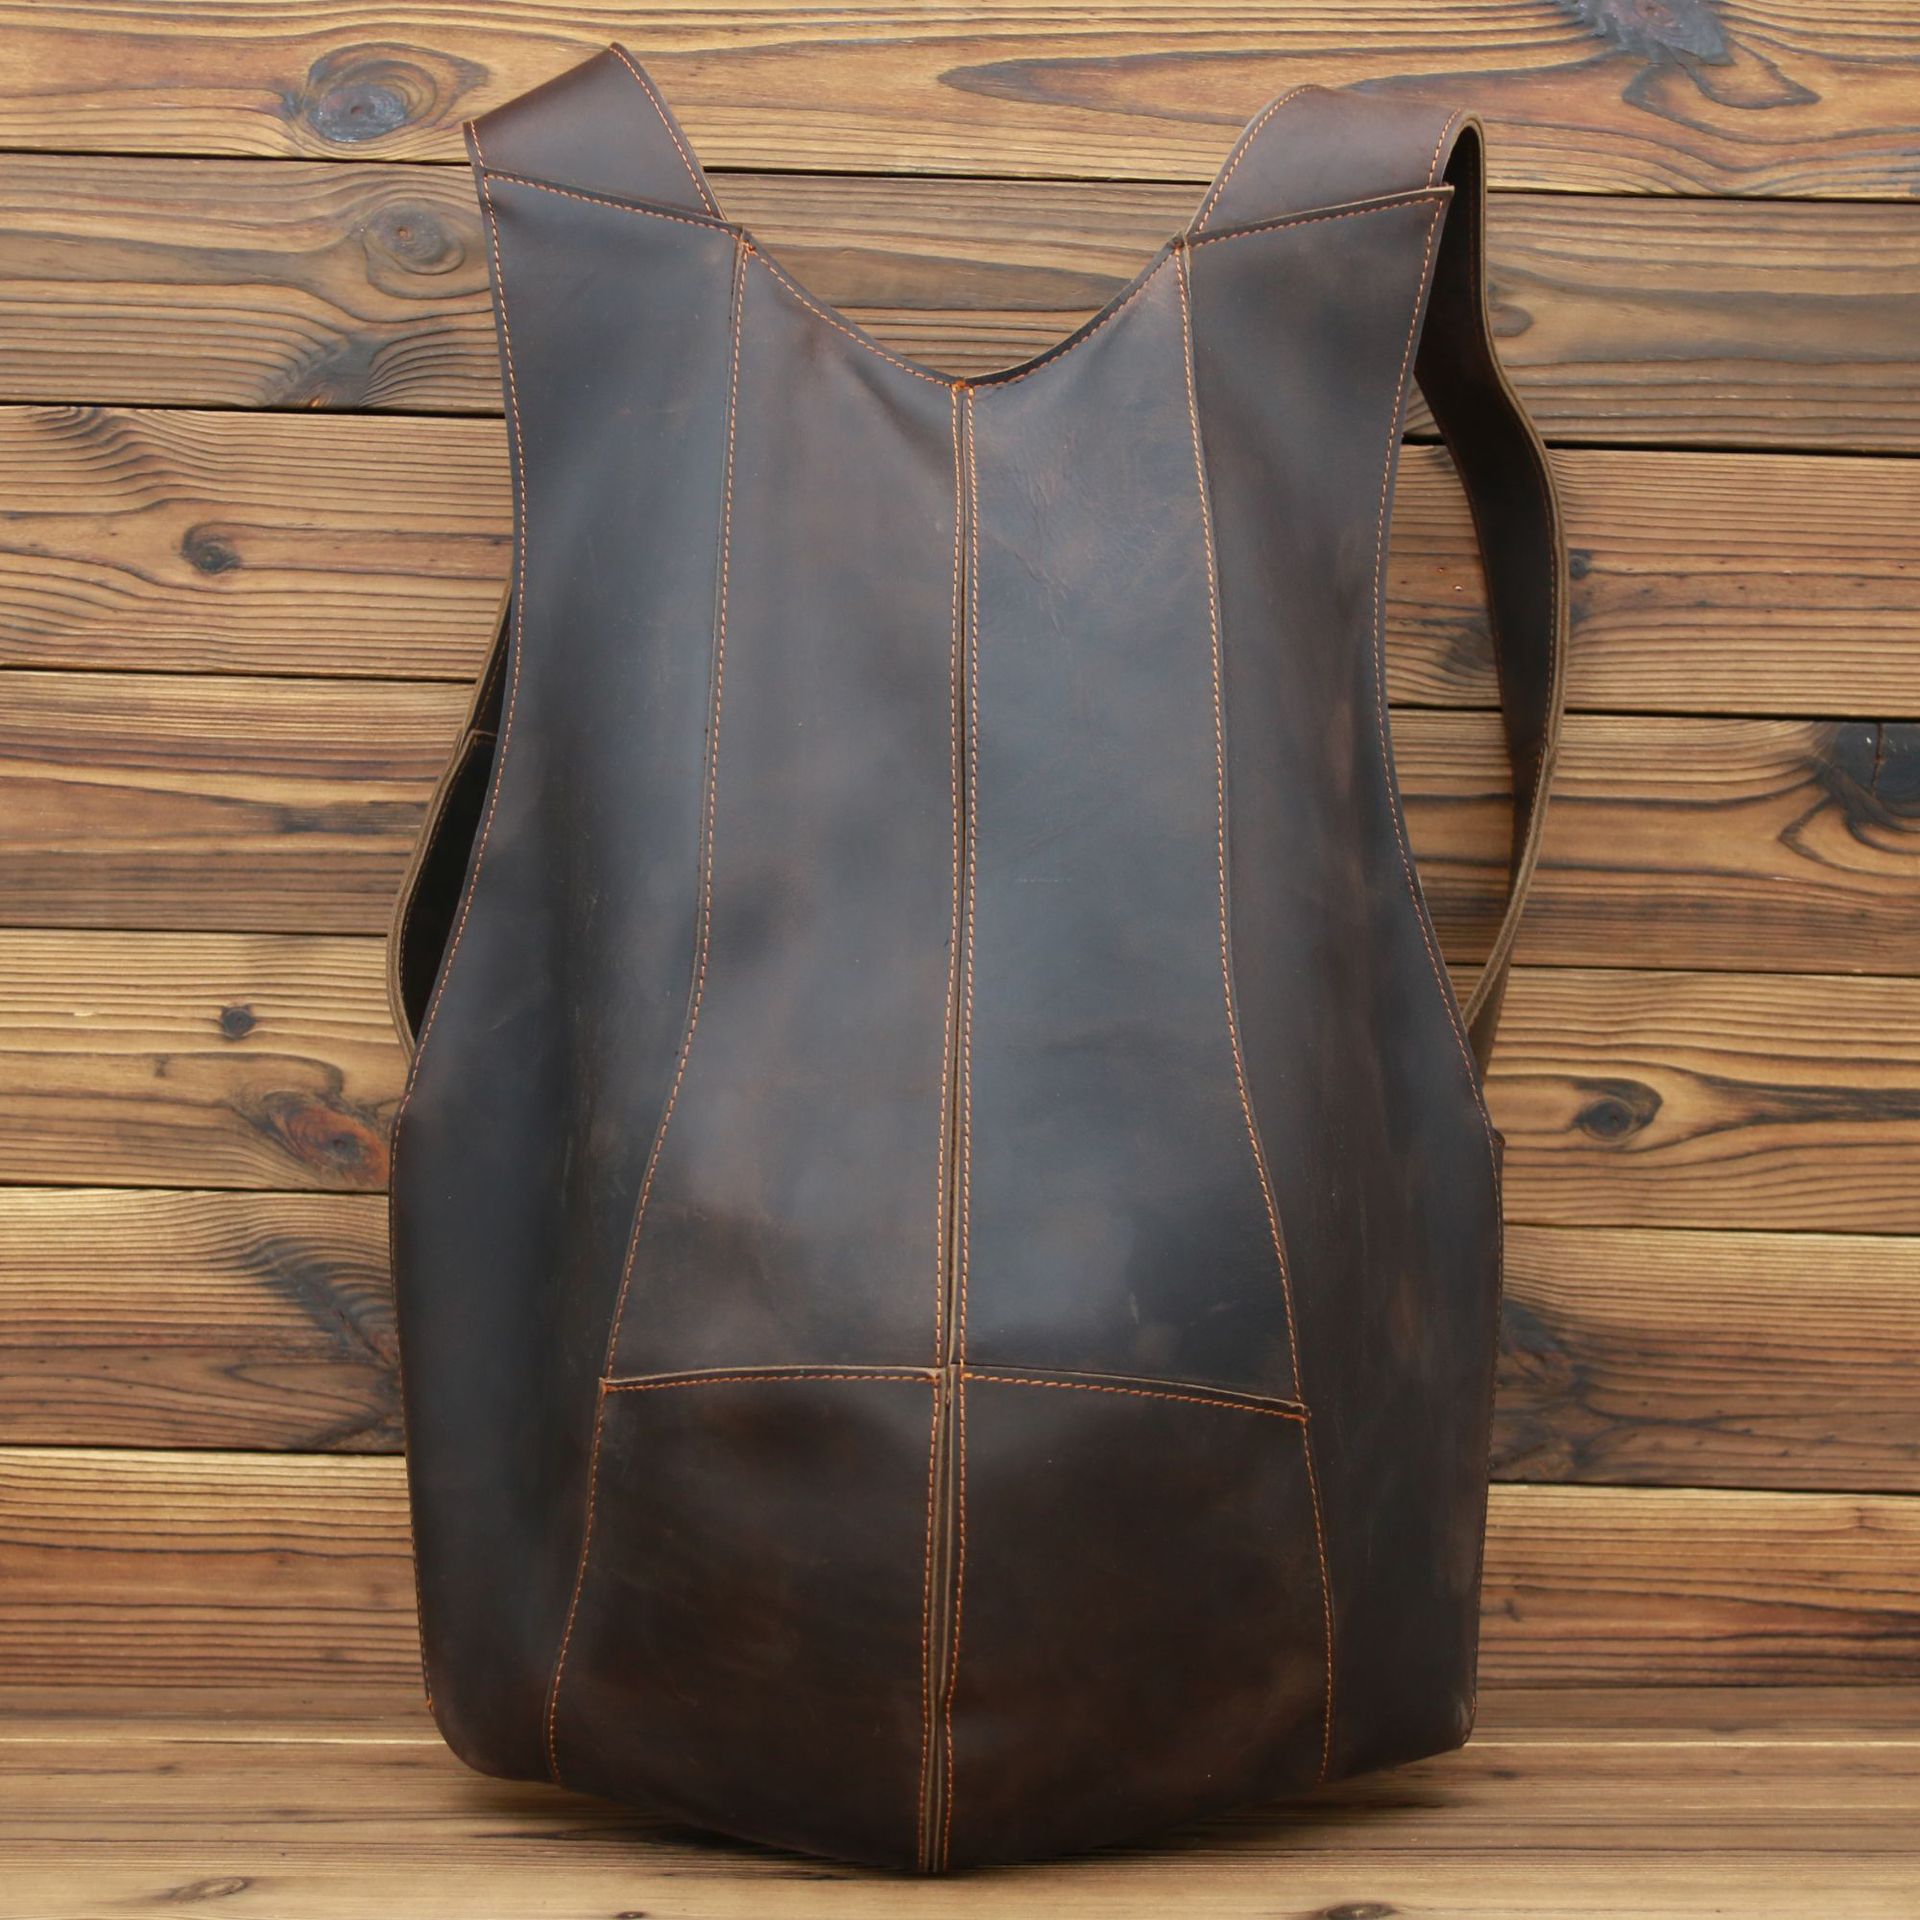 Toyella 2108 Men's Backpack Crazy Horse Leather Backpack Retro Dark Brown College Style Student Backpack Boys Backpack Lychee brown Not adjustable - image 2 of 7